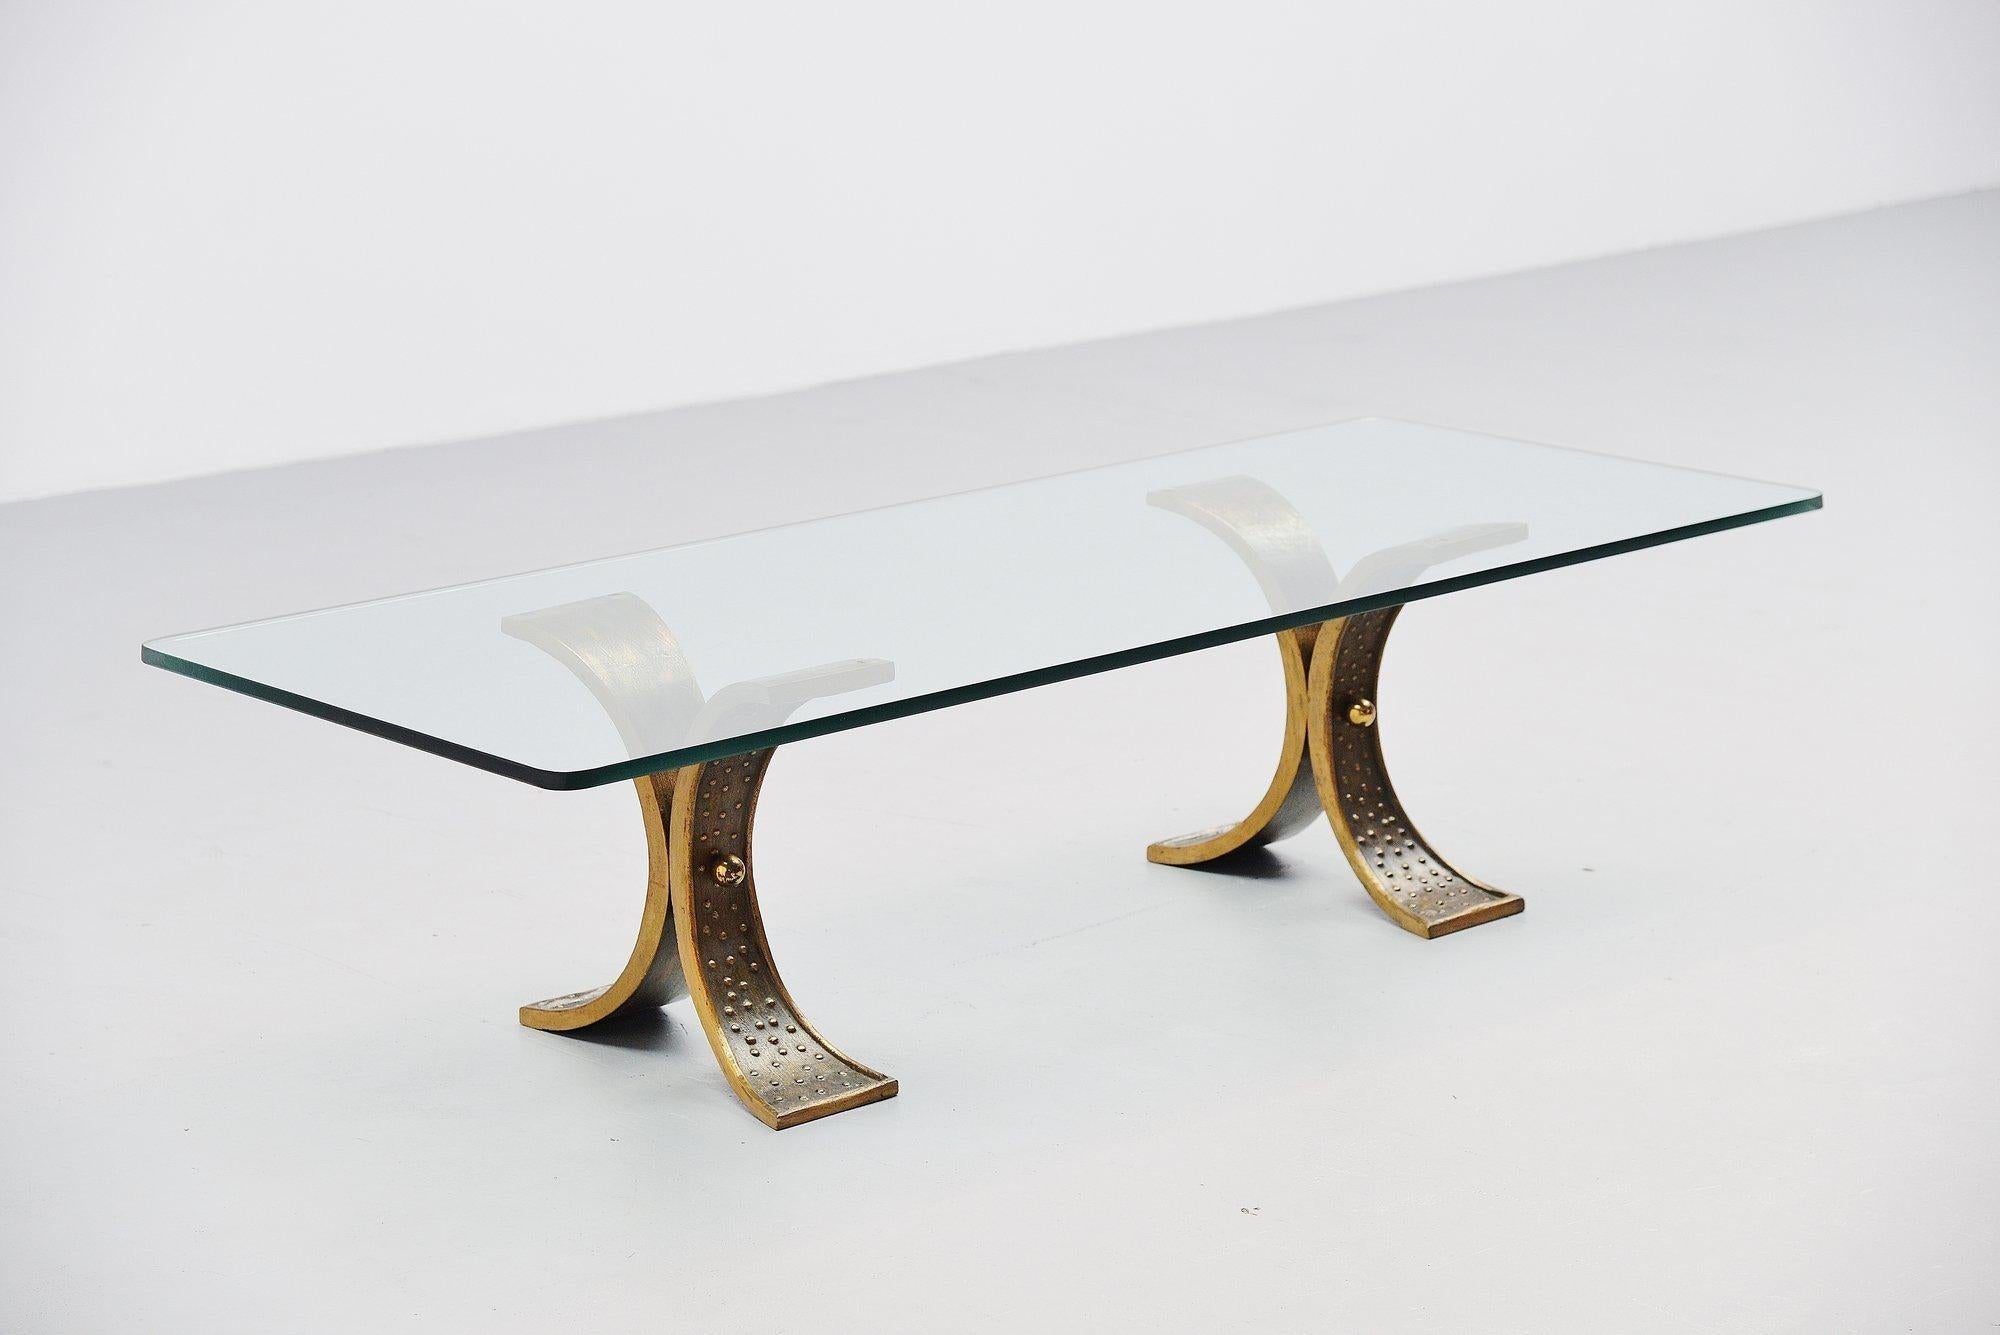 Nice large sculptural coffee table made in France 1970. This table has heavy solid bronze sculptural feet that support a thick glass rectangular top. The table is made by unknown designer or manufacturer but this shows quality all over. I think the